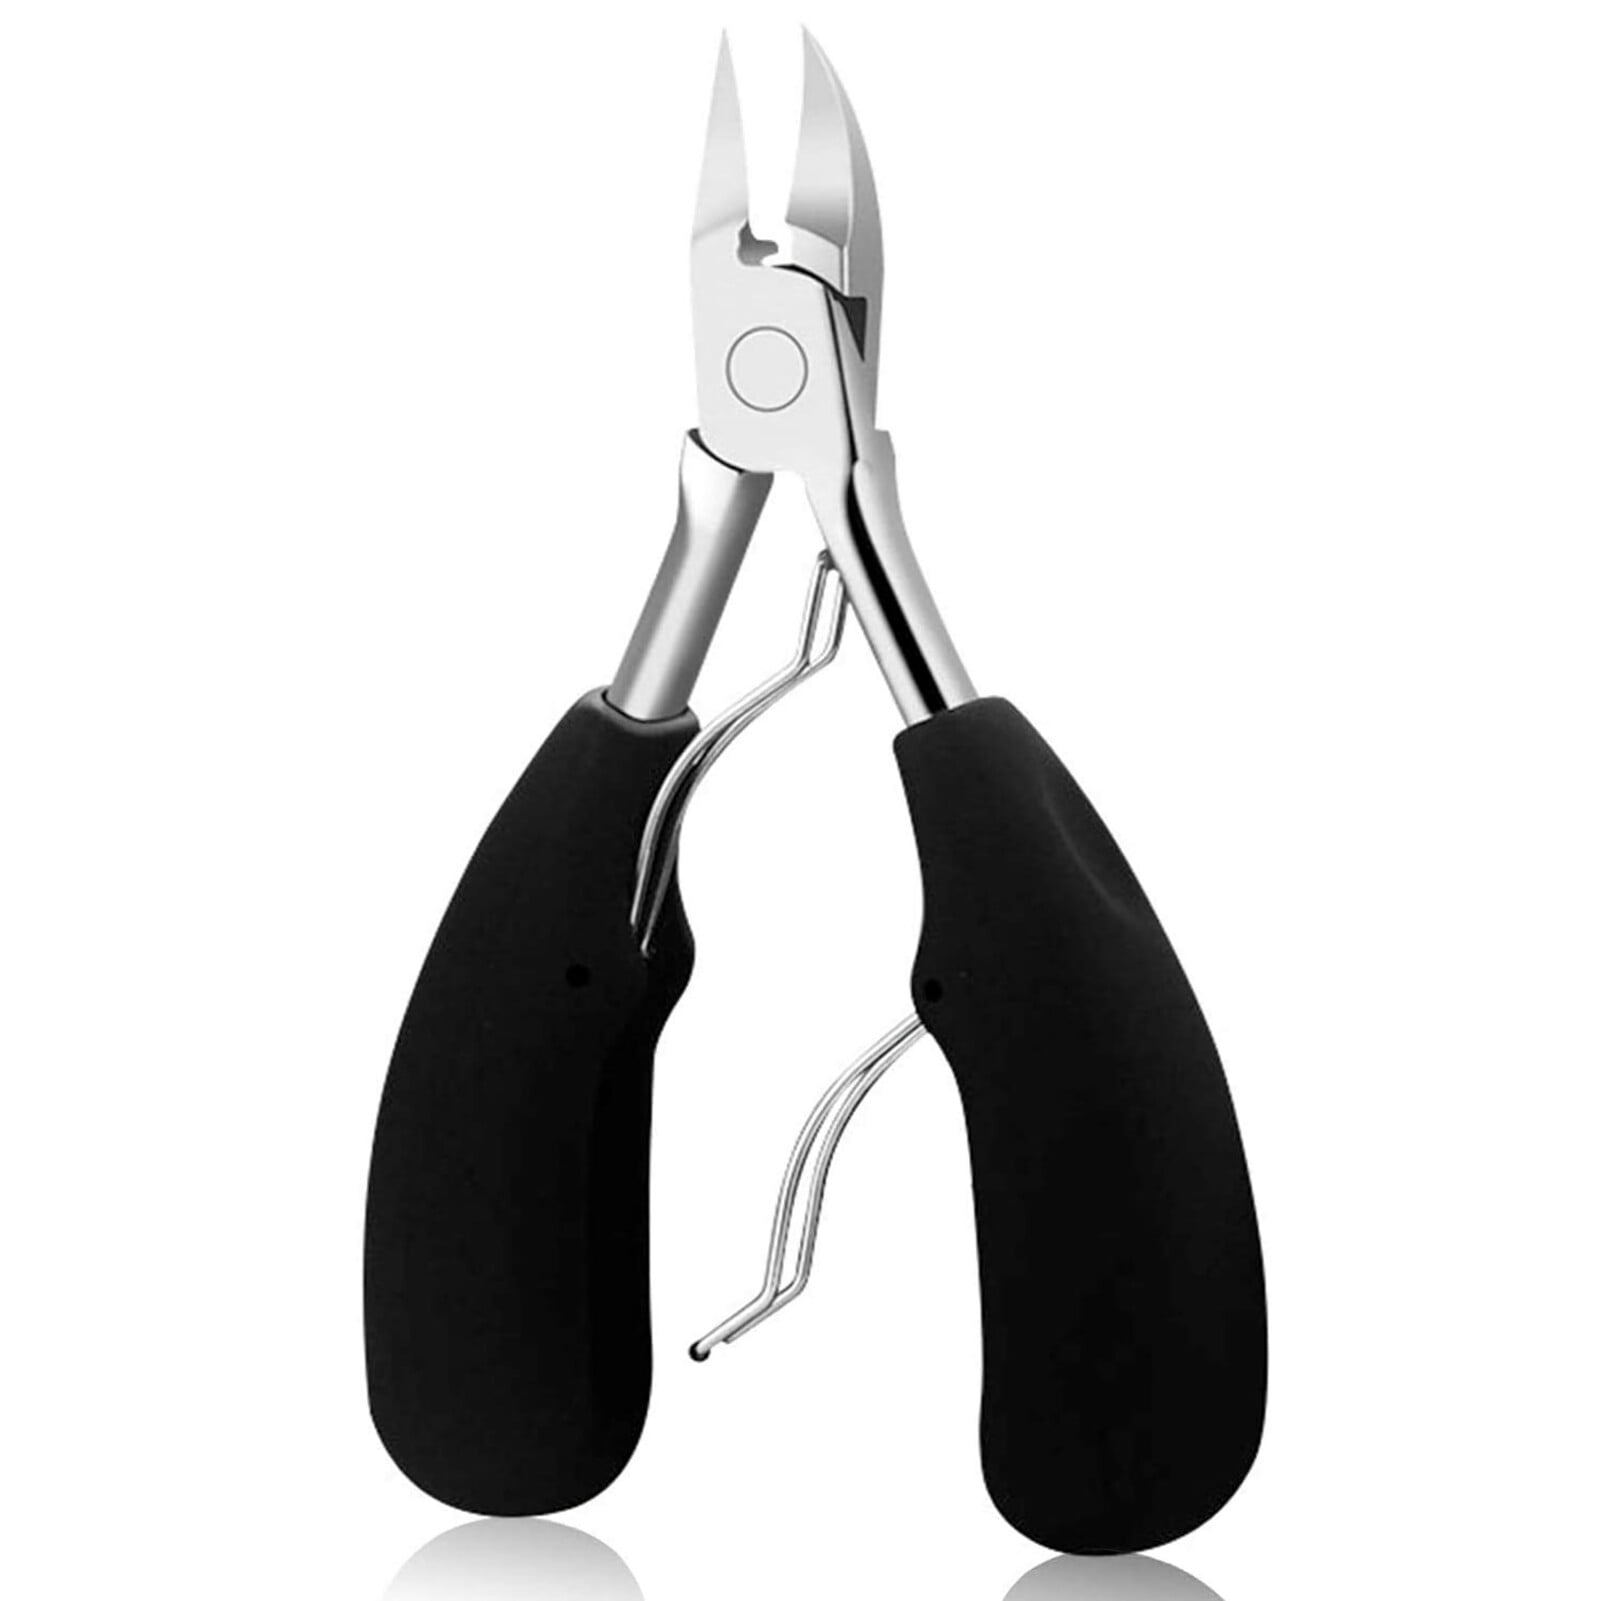 Nail Clippers For Thick Nails – KitchenWW